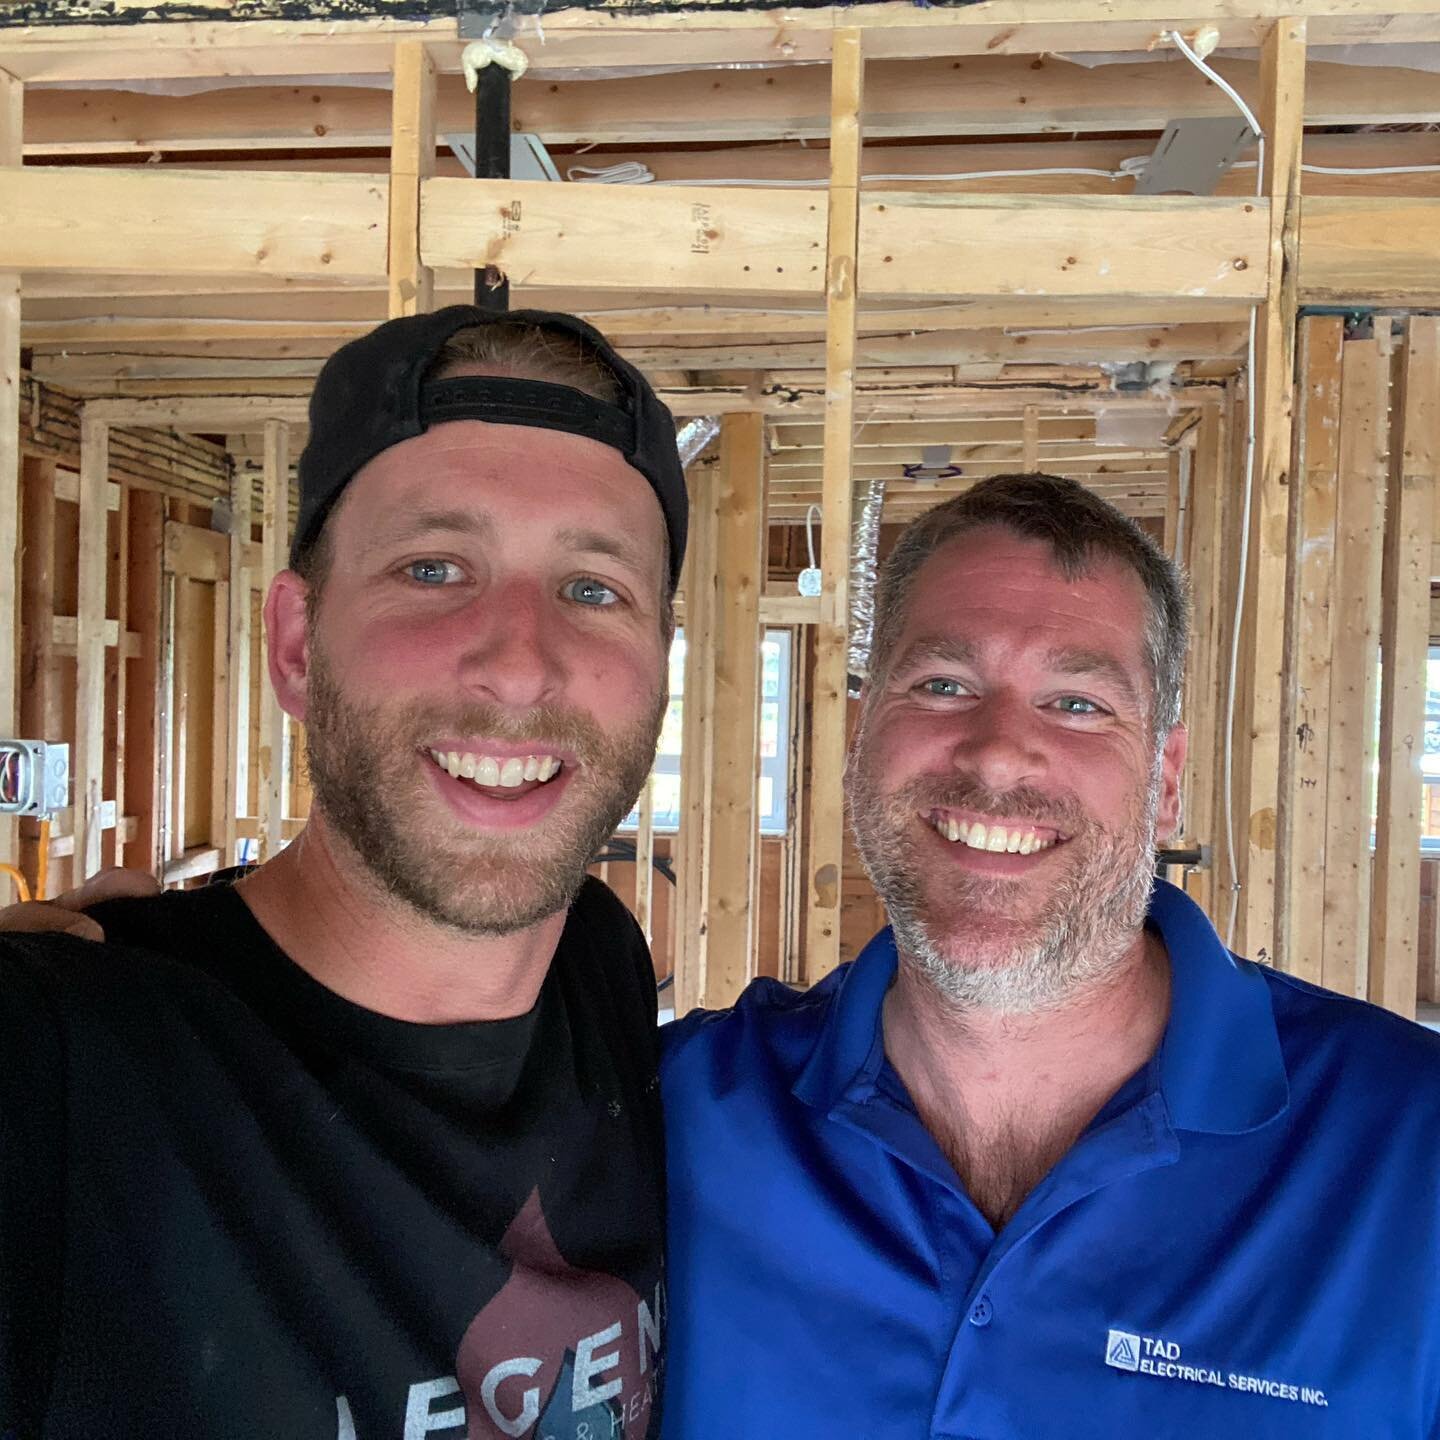 Kicking-off a new full-scale renovation project today with one of my older brothers!
&bull;
Surreal to be collaborating on a project with my brother and his small business. Seeing him find success certainly helped me take the leap to start Legend!
&b